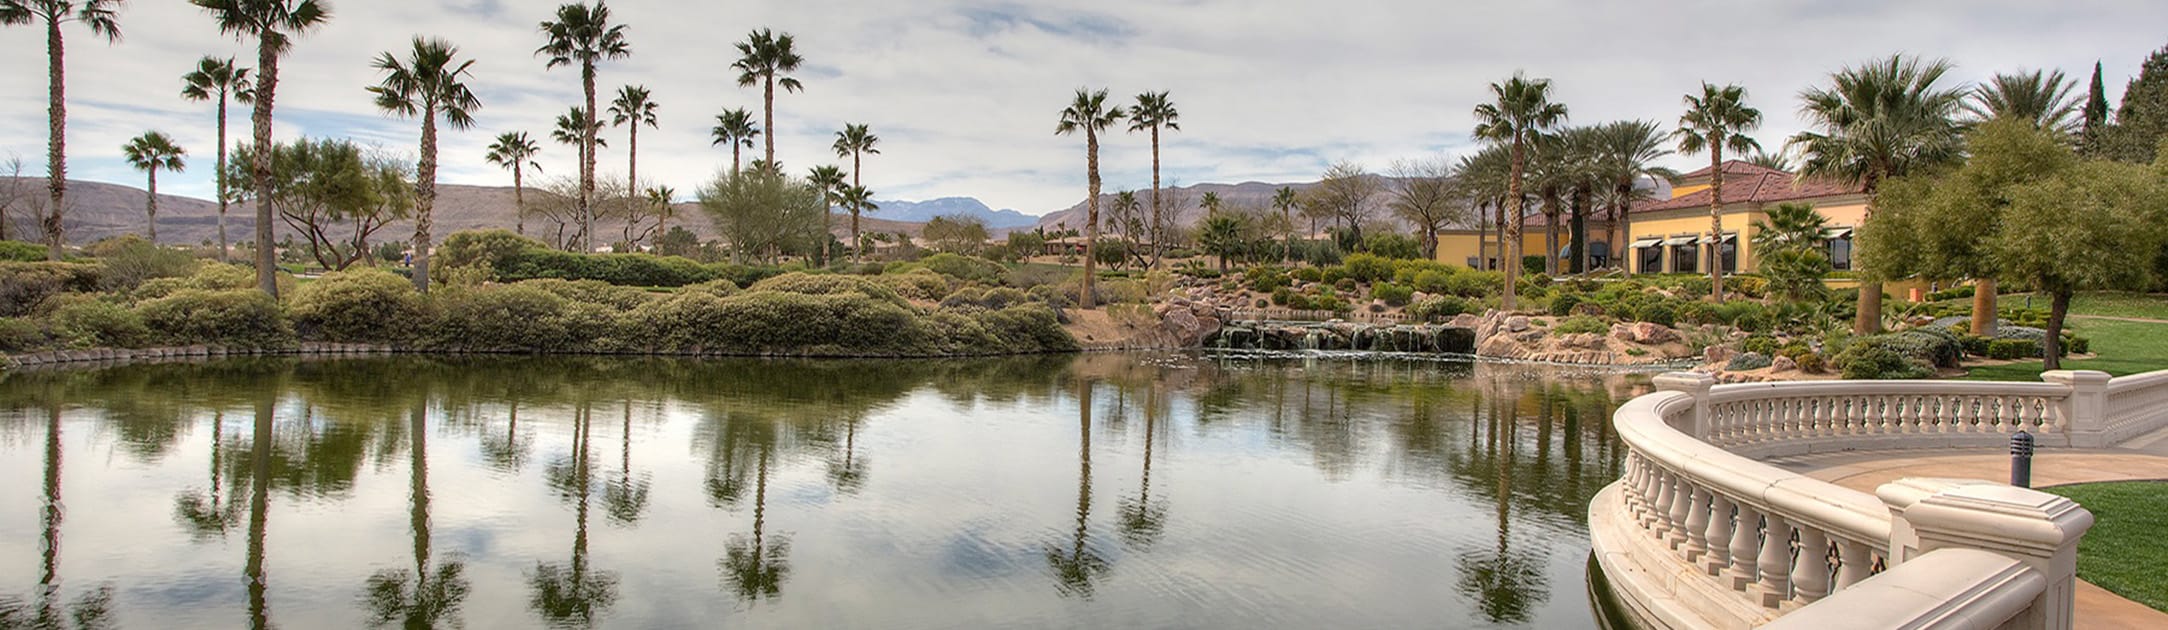 Lake, bushes, palm trees with mountains in the background.